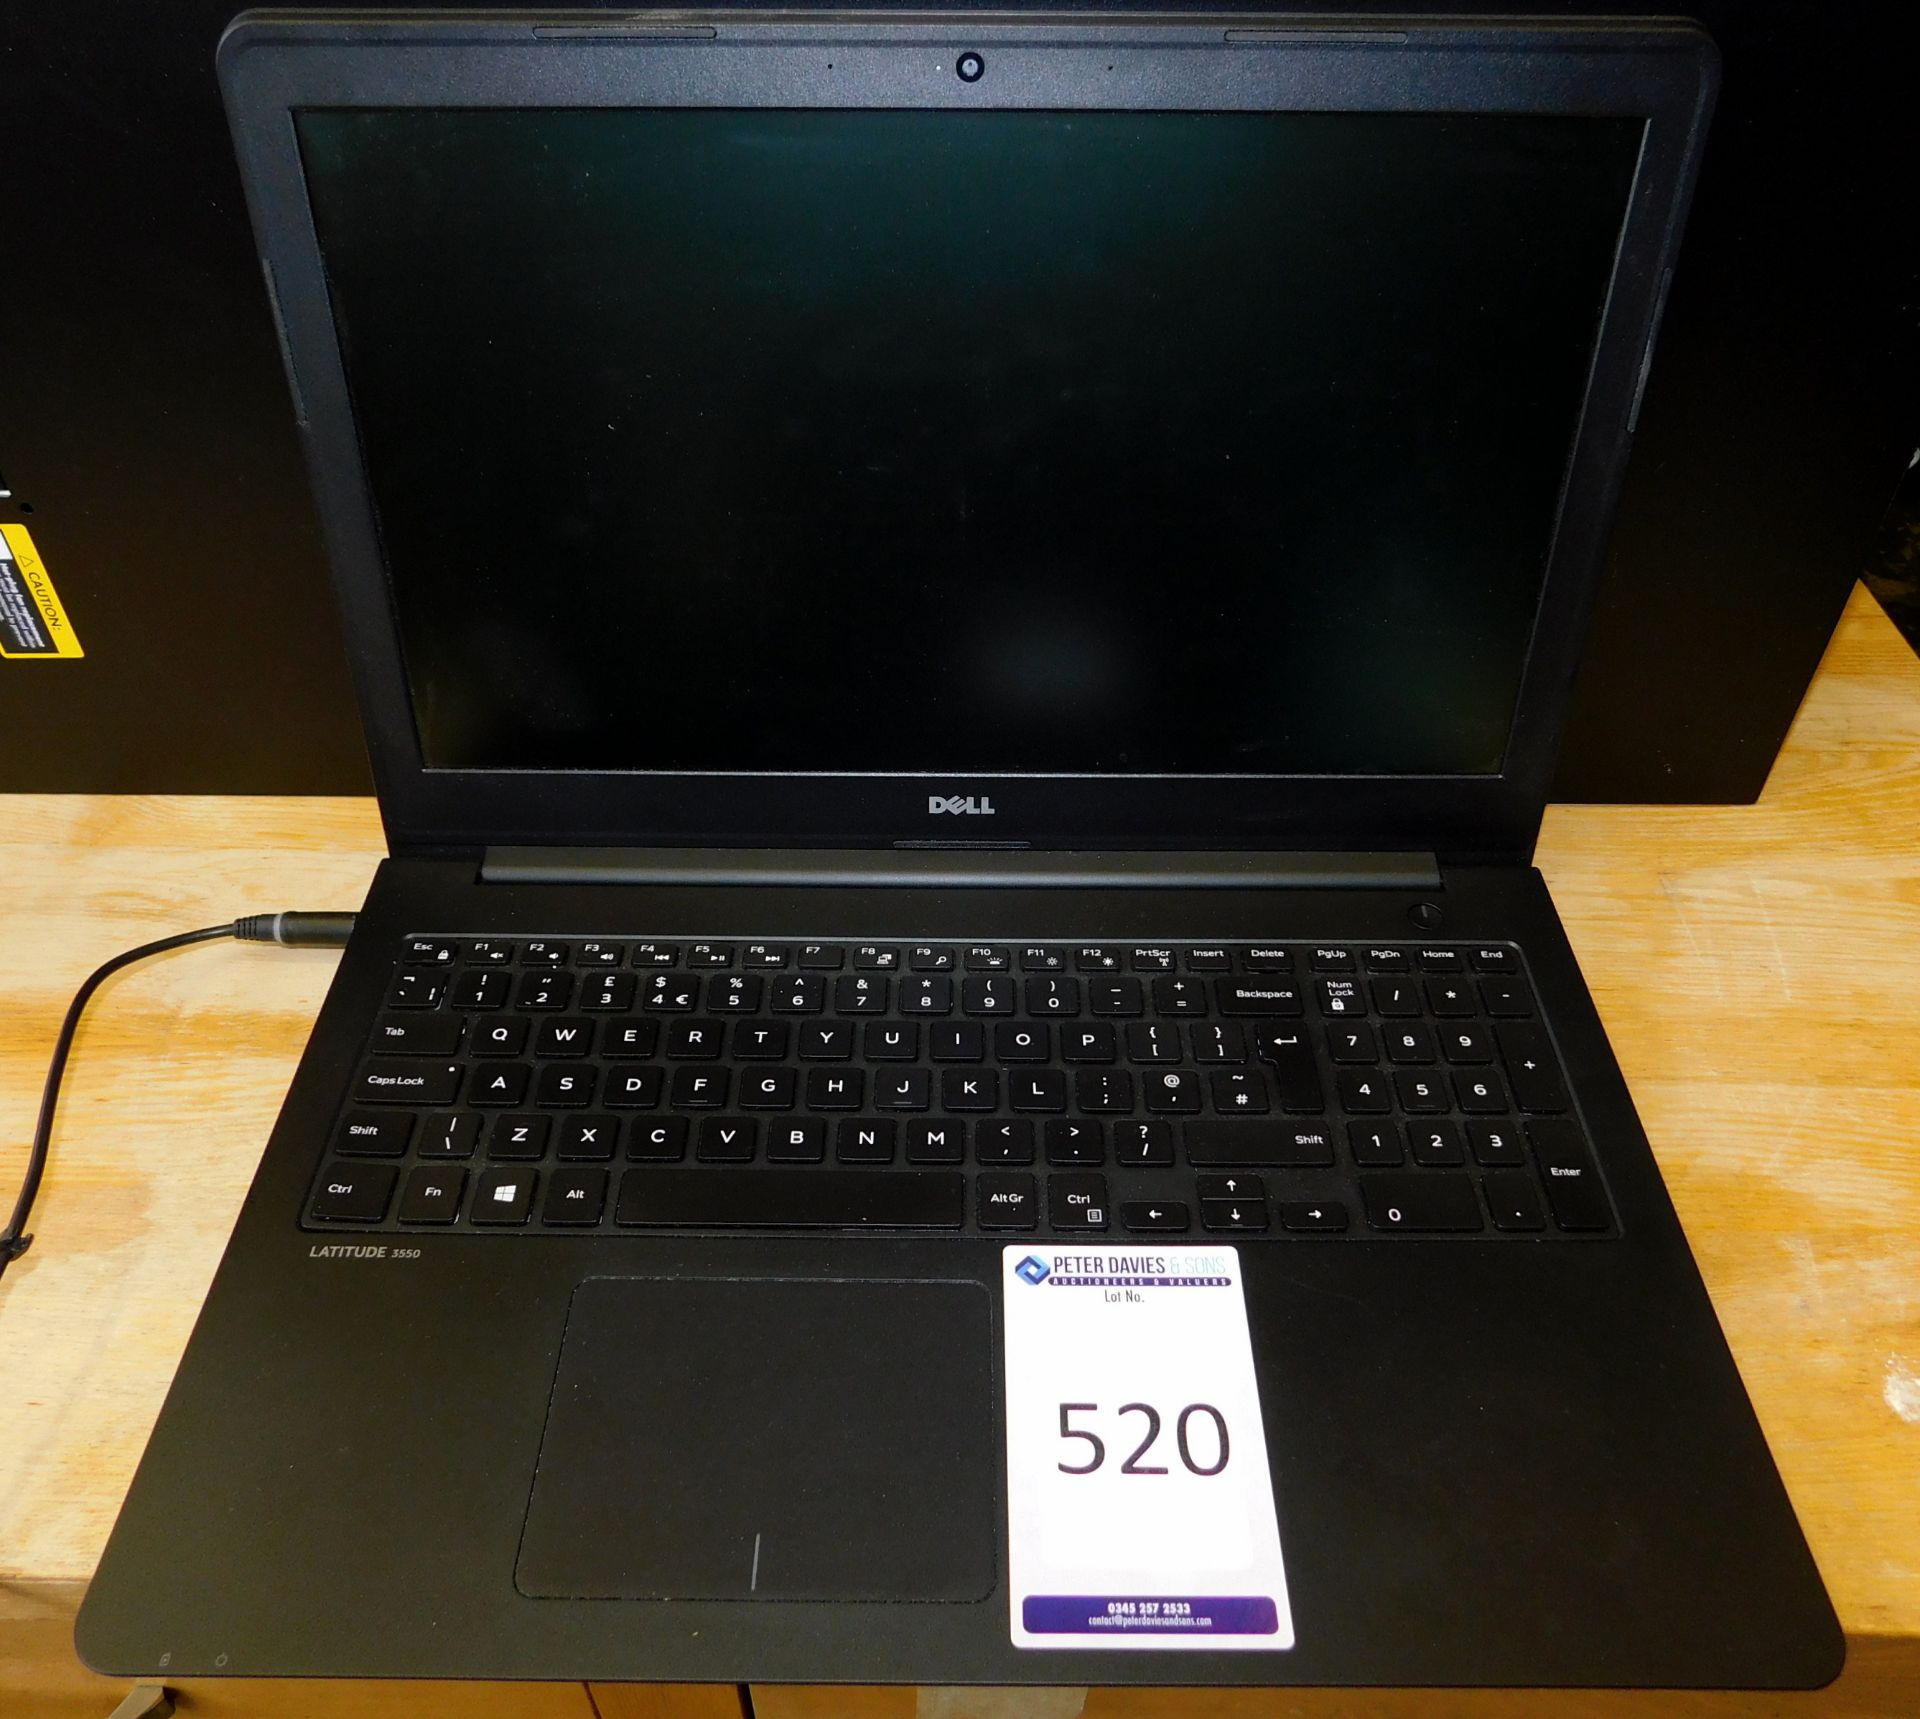 Dell Latitude 3550 i5 b2.2ghz Laptop with 4gb RAM, 500gb HDD (Located Stockport – Viewing by